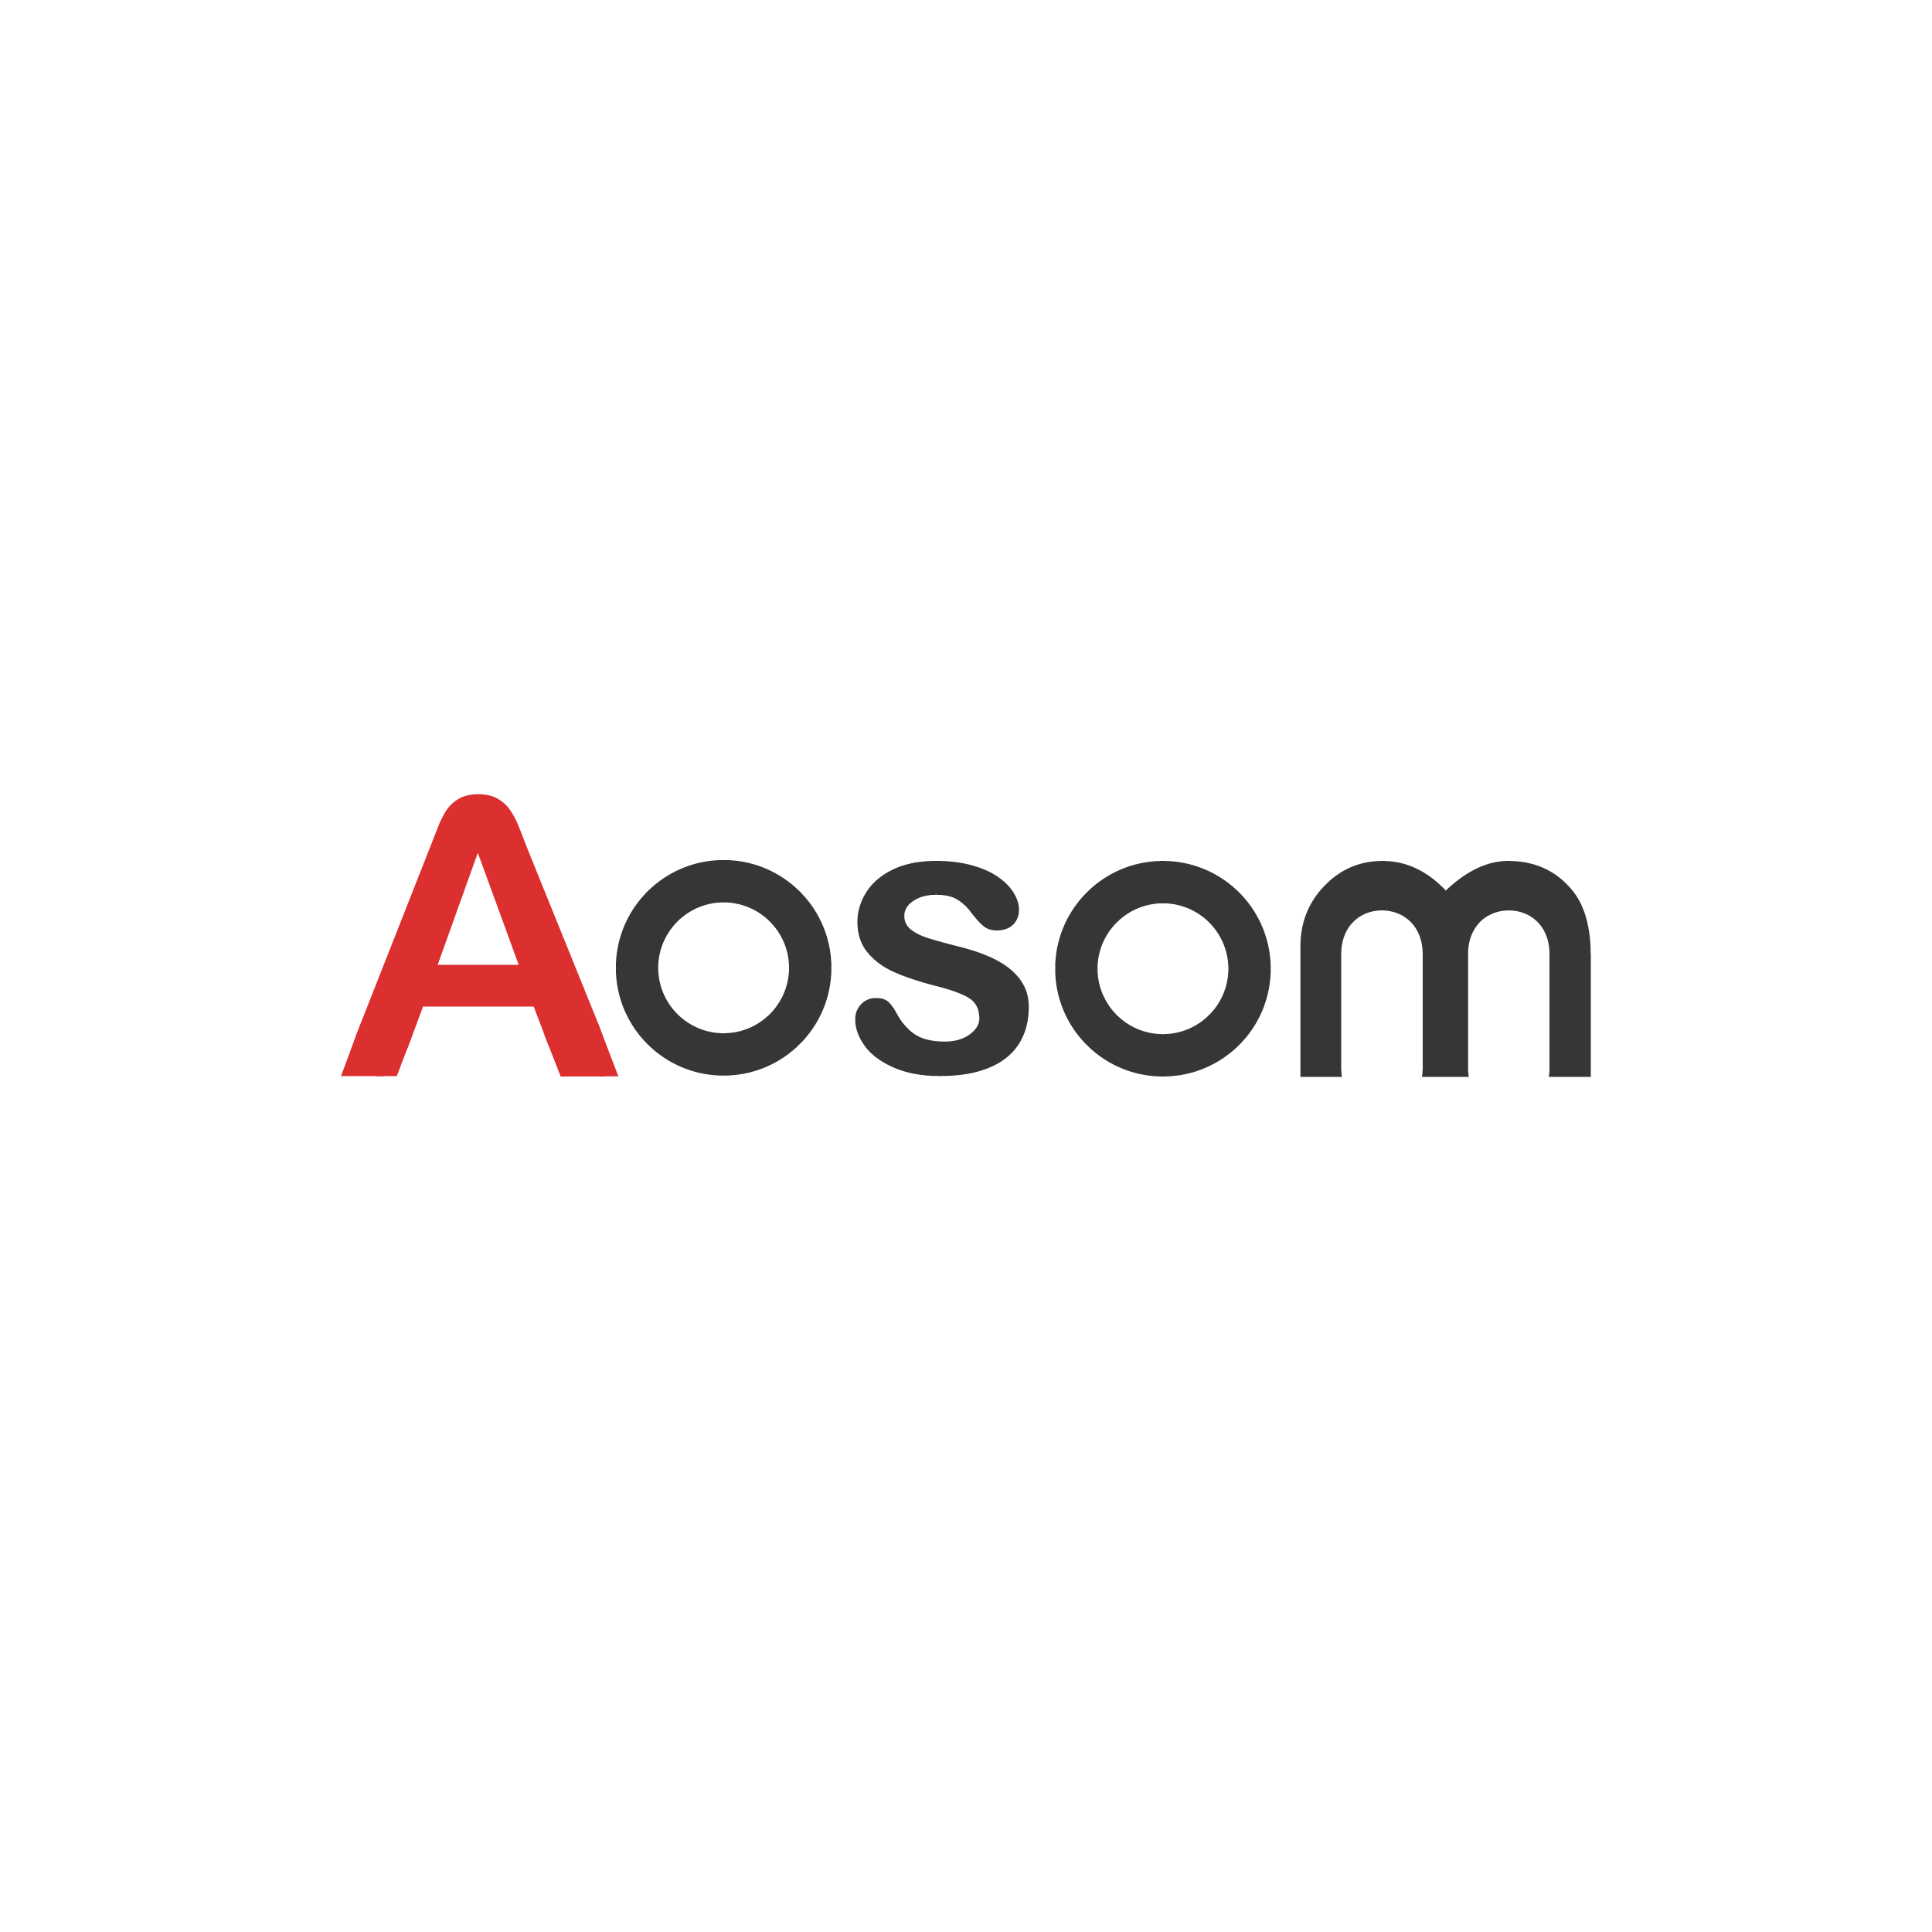 Aosom Coupons & Promo Codes